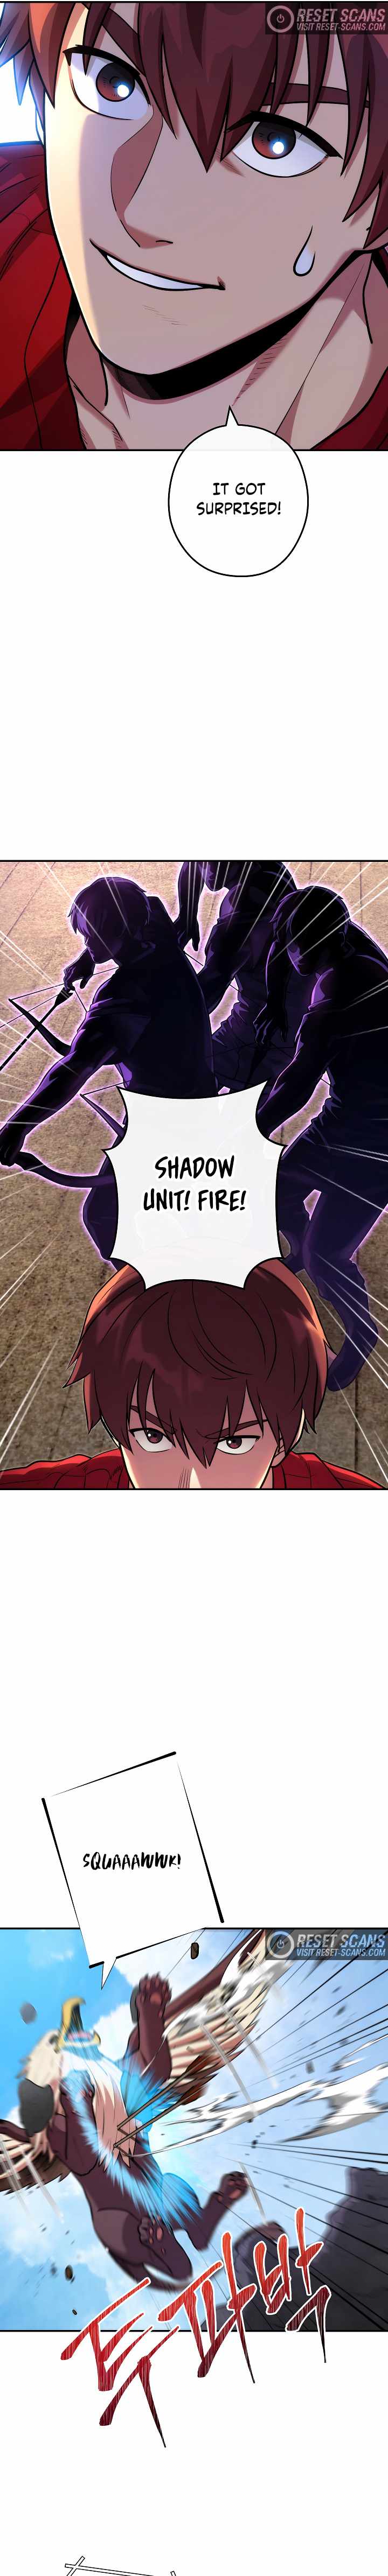 Dungeon Reset chapter 134